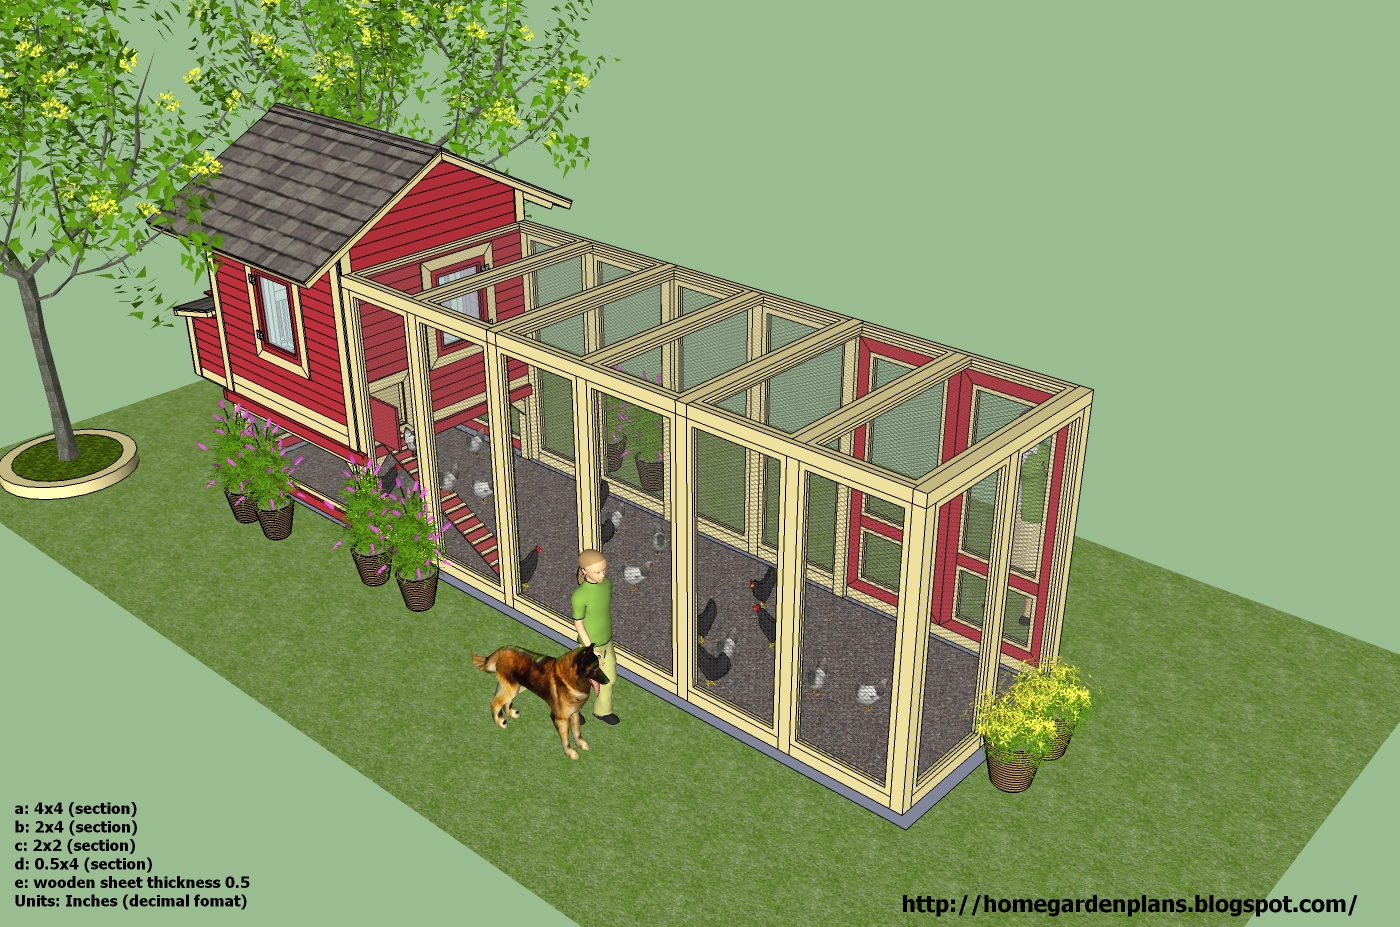 Diw You: Access Chicken coop plan for 20 chickens - 2%20chicken%20coop%20plans